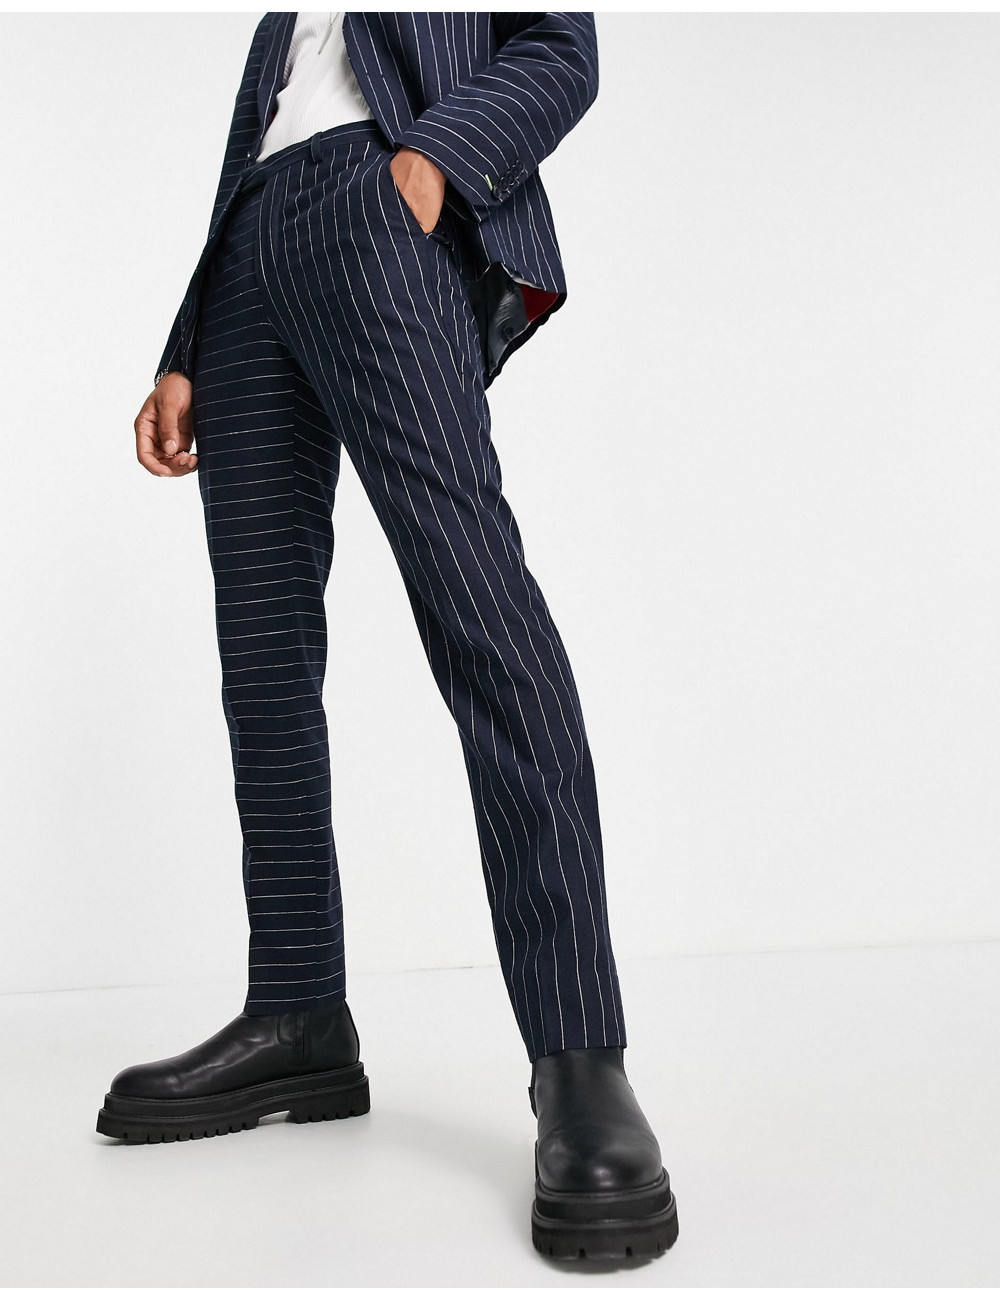 Twisted Tailor suit...